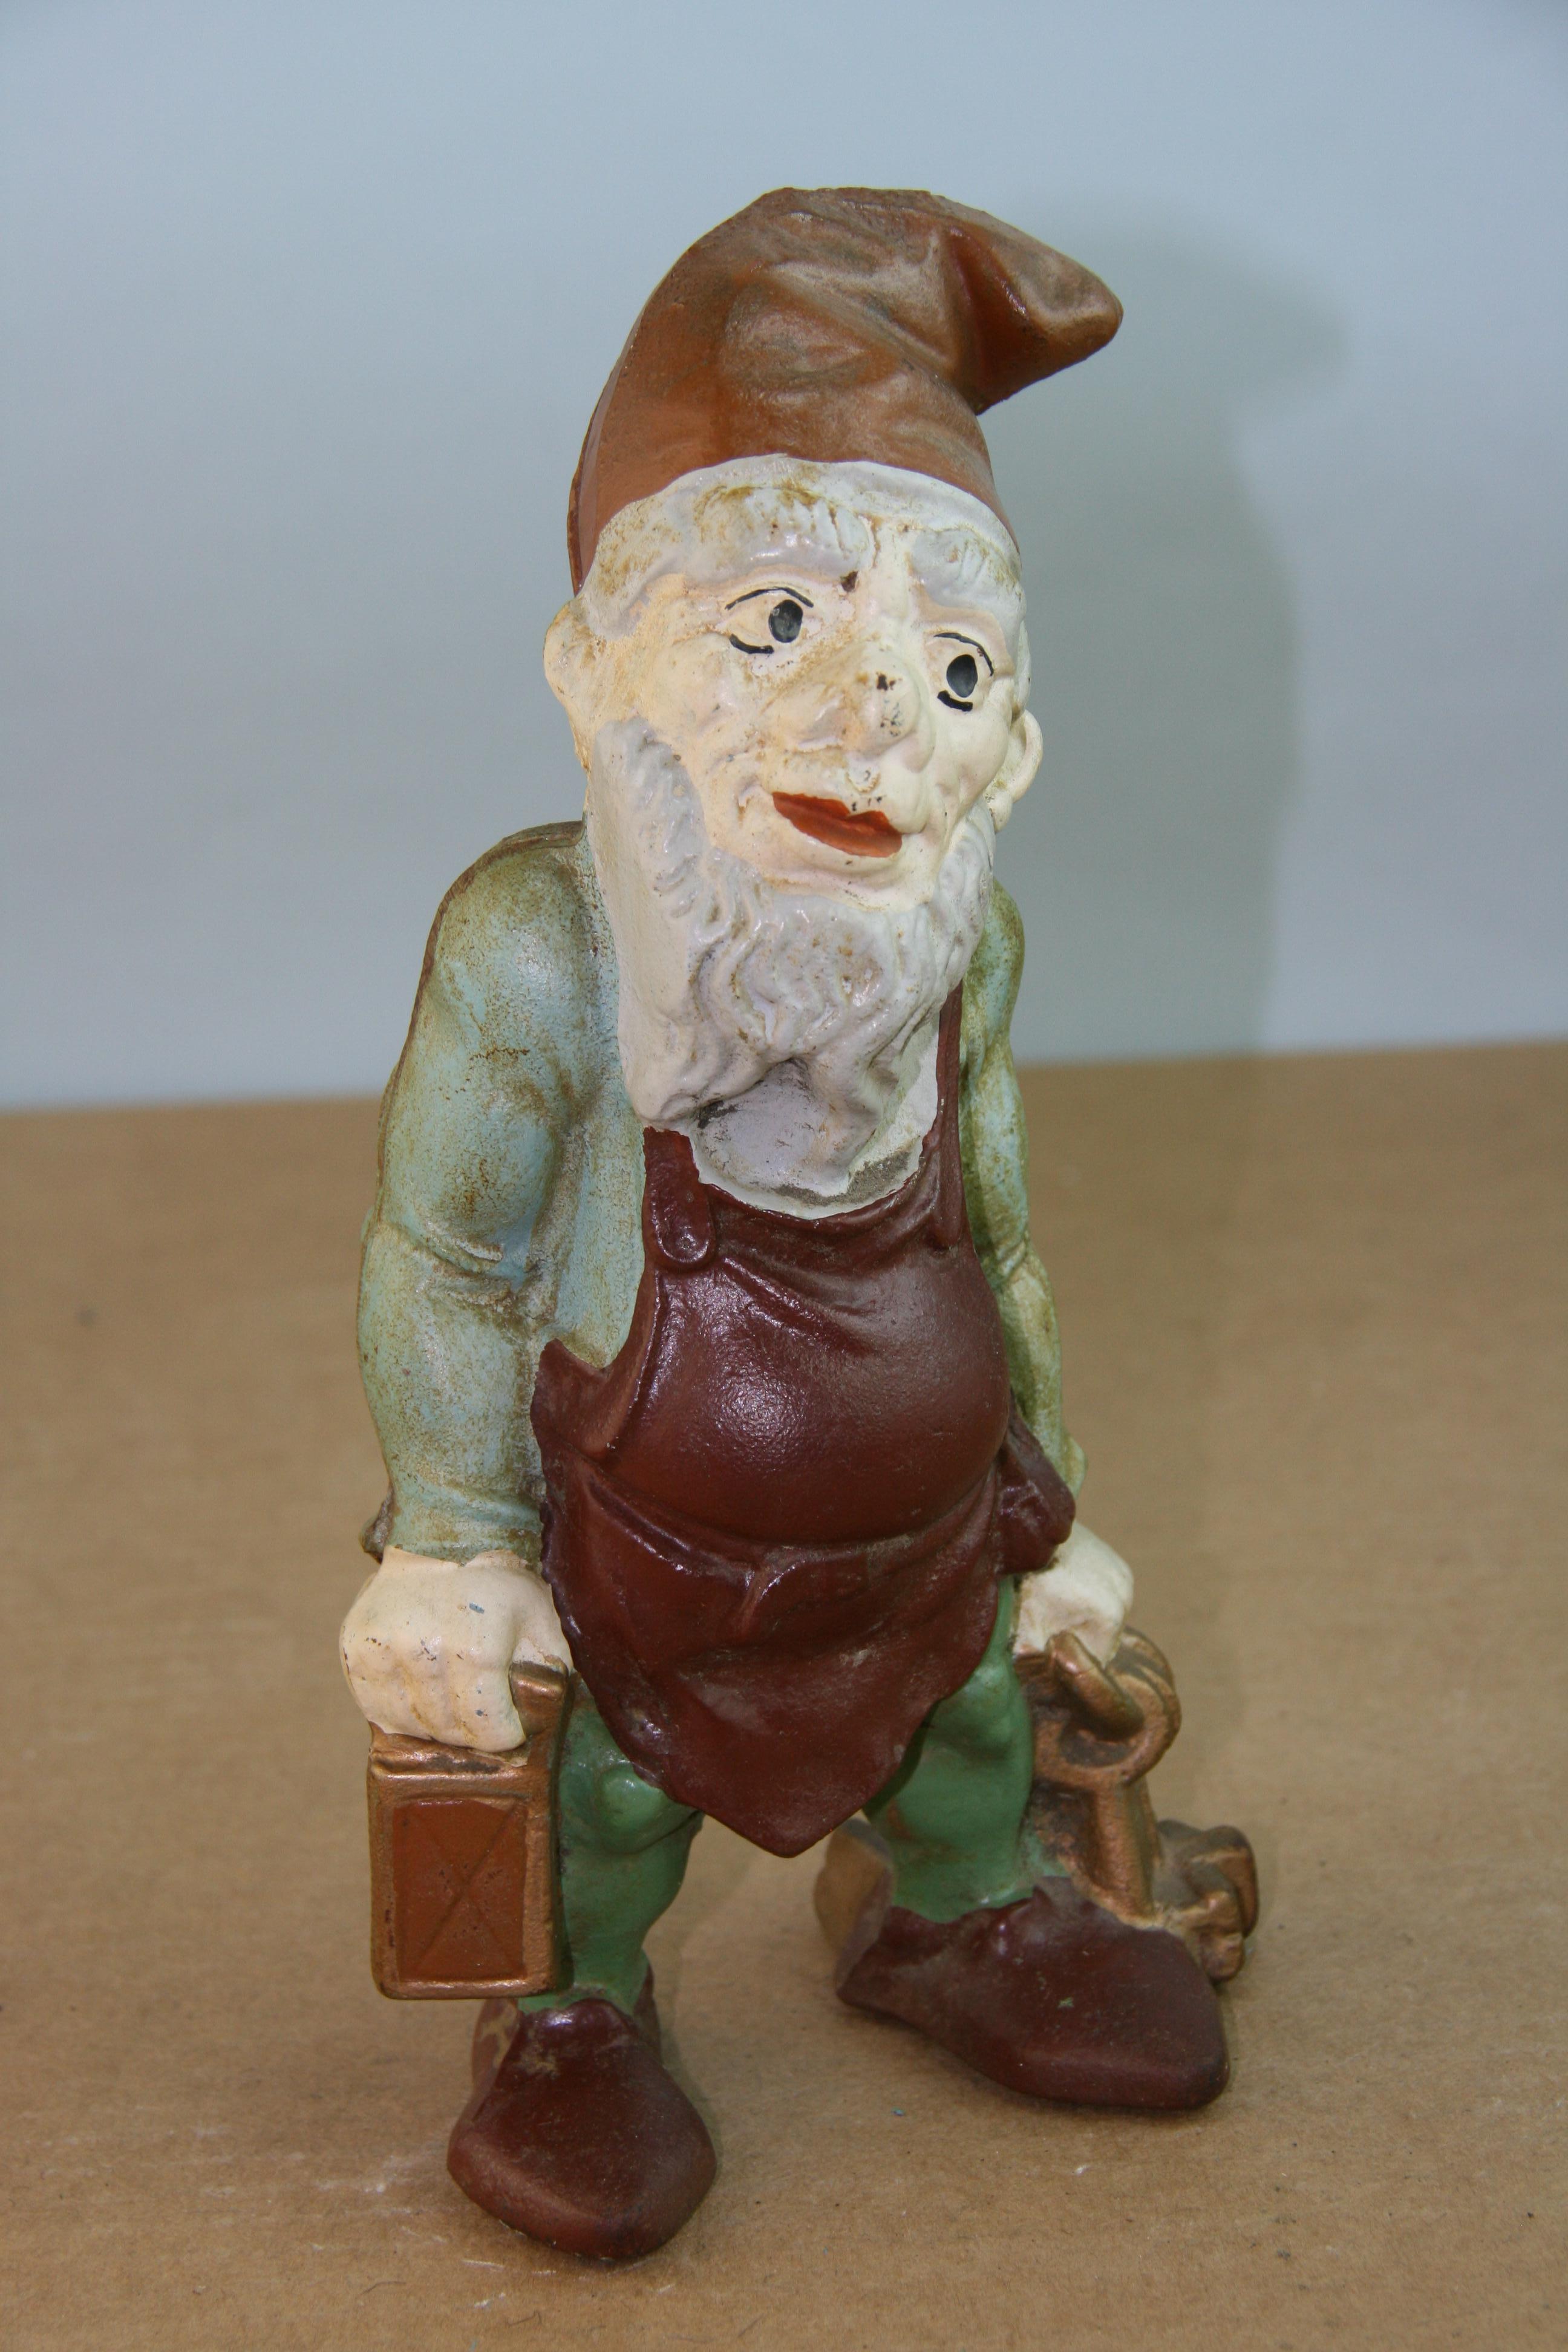 Gnome hand cast and painted American antique garden sculpture and coin bank/doorstop
In great condition considering its age.